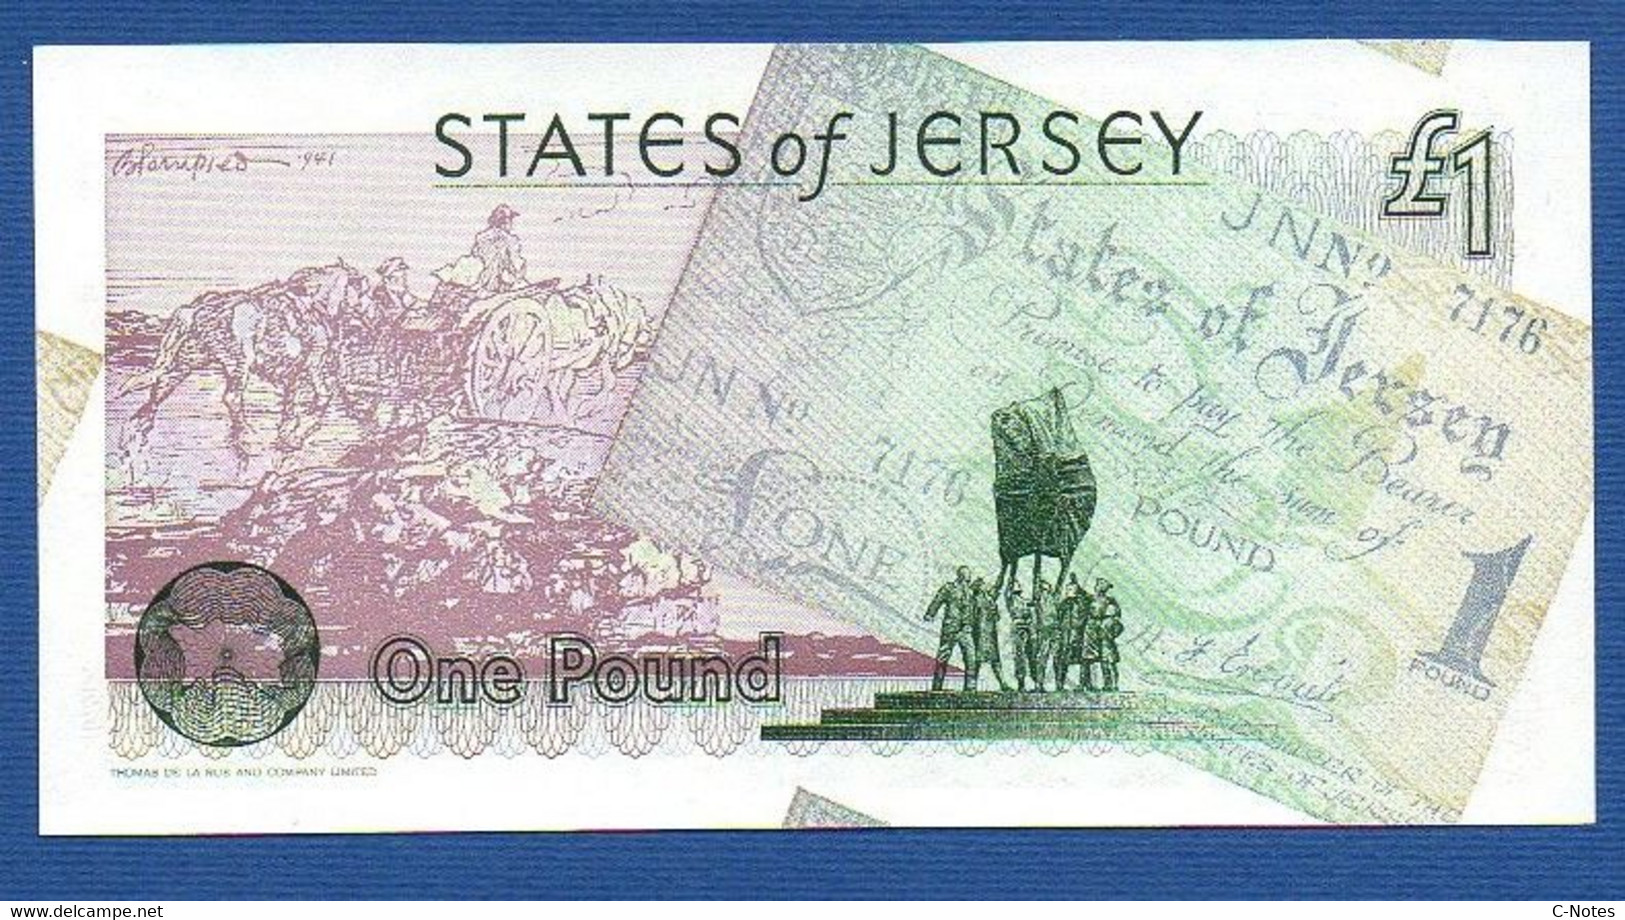 JERSEY - P.25– 1 POUND 1995 UNC, Serie LJ 019403 - "50th Anniversary Of Liberation" Commemorative Issue - Jersey